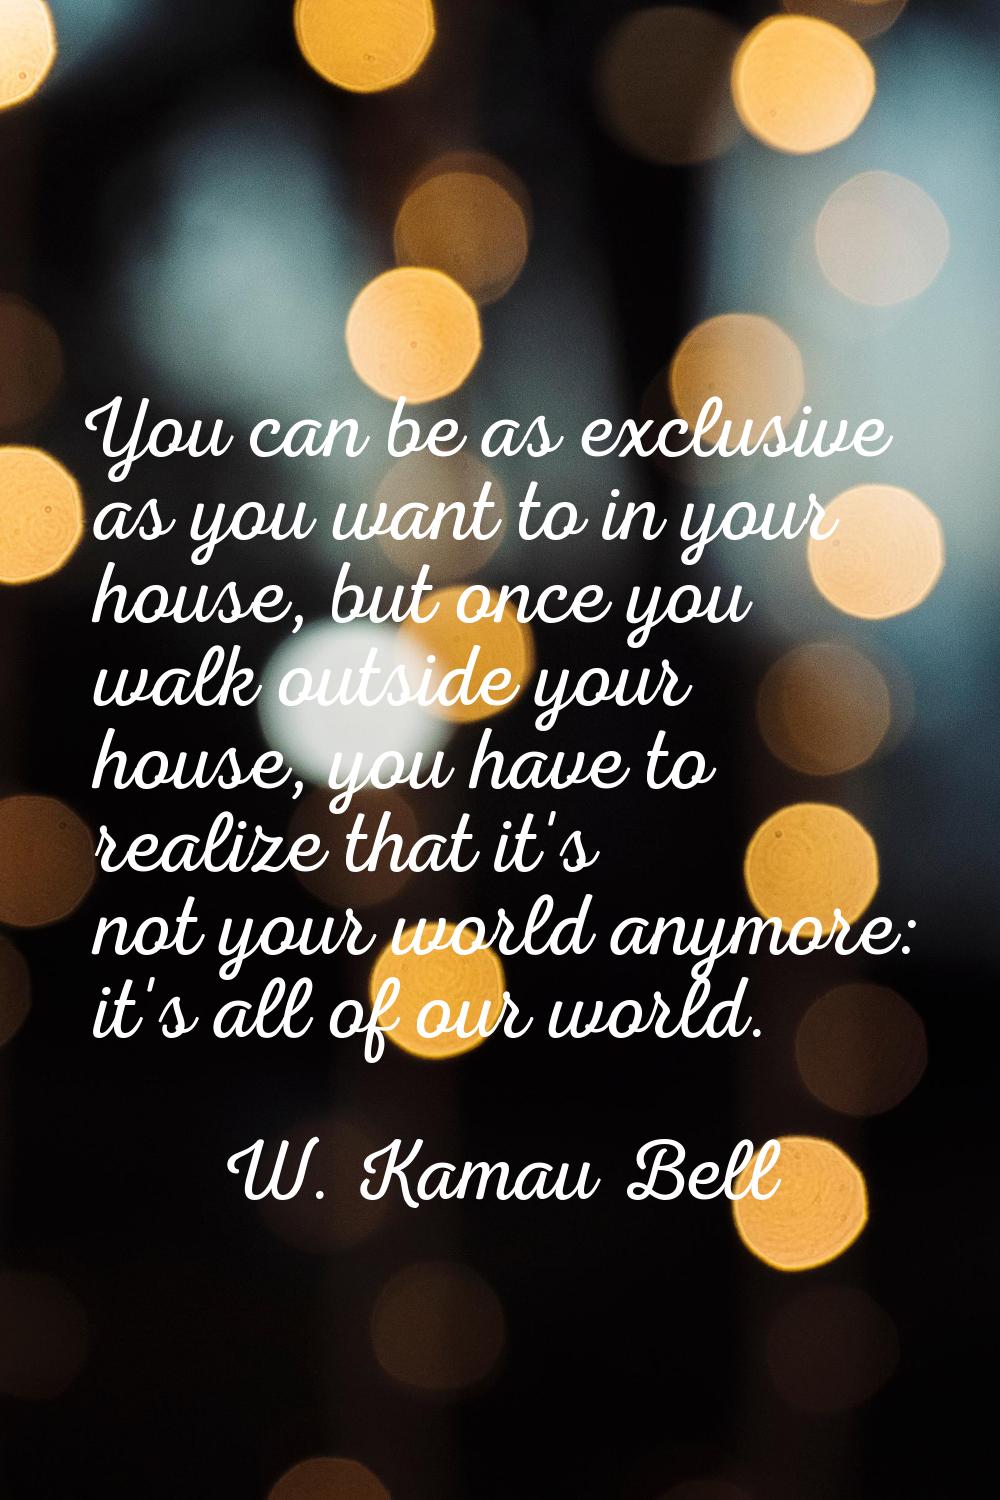 You can be as exclusive as you want to in your house, but once you walk outside your house, you hav